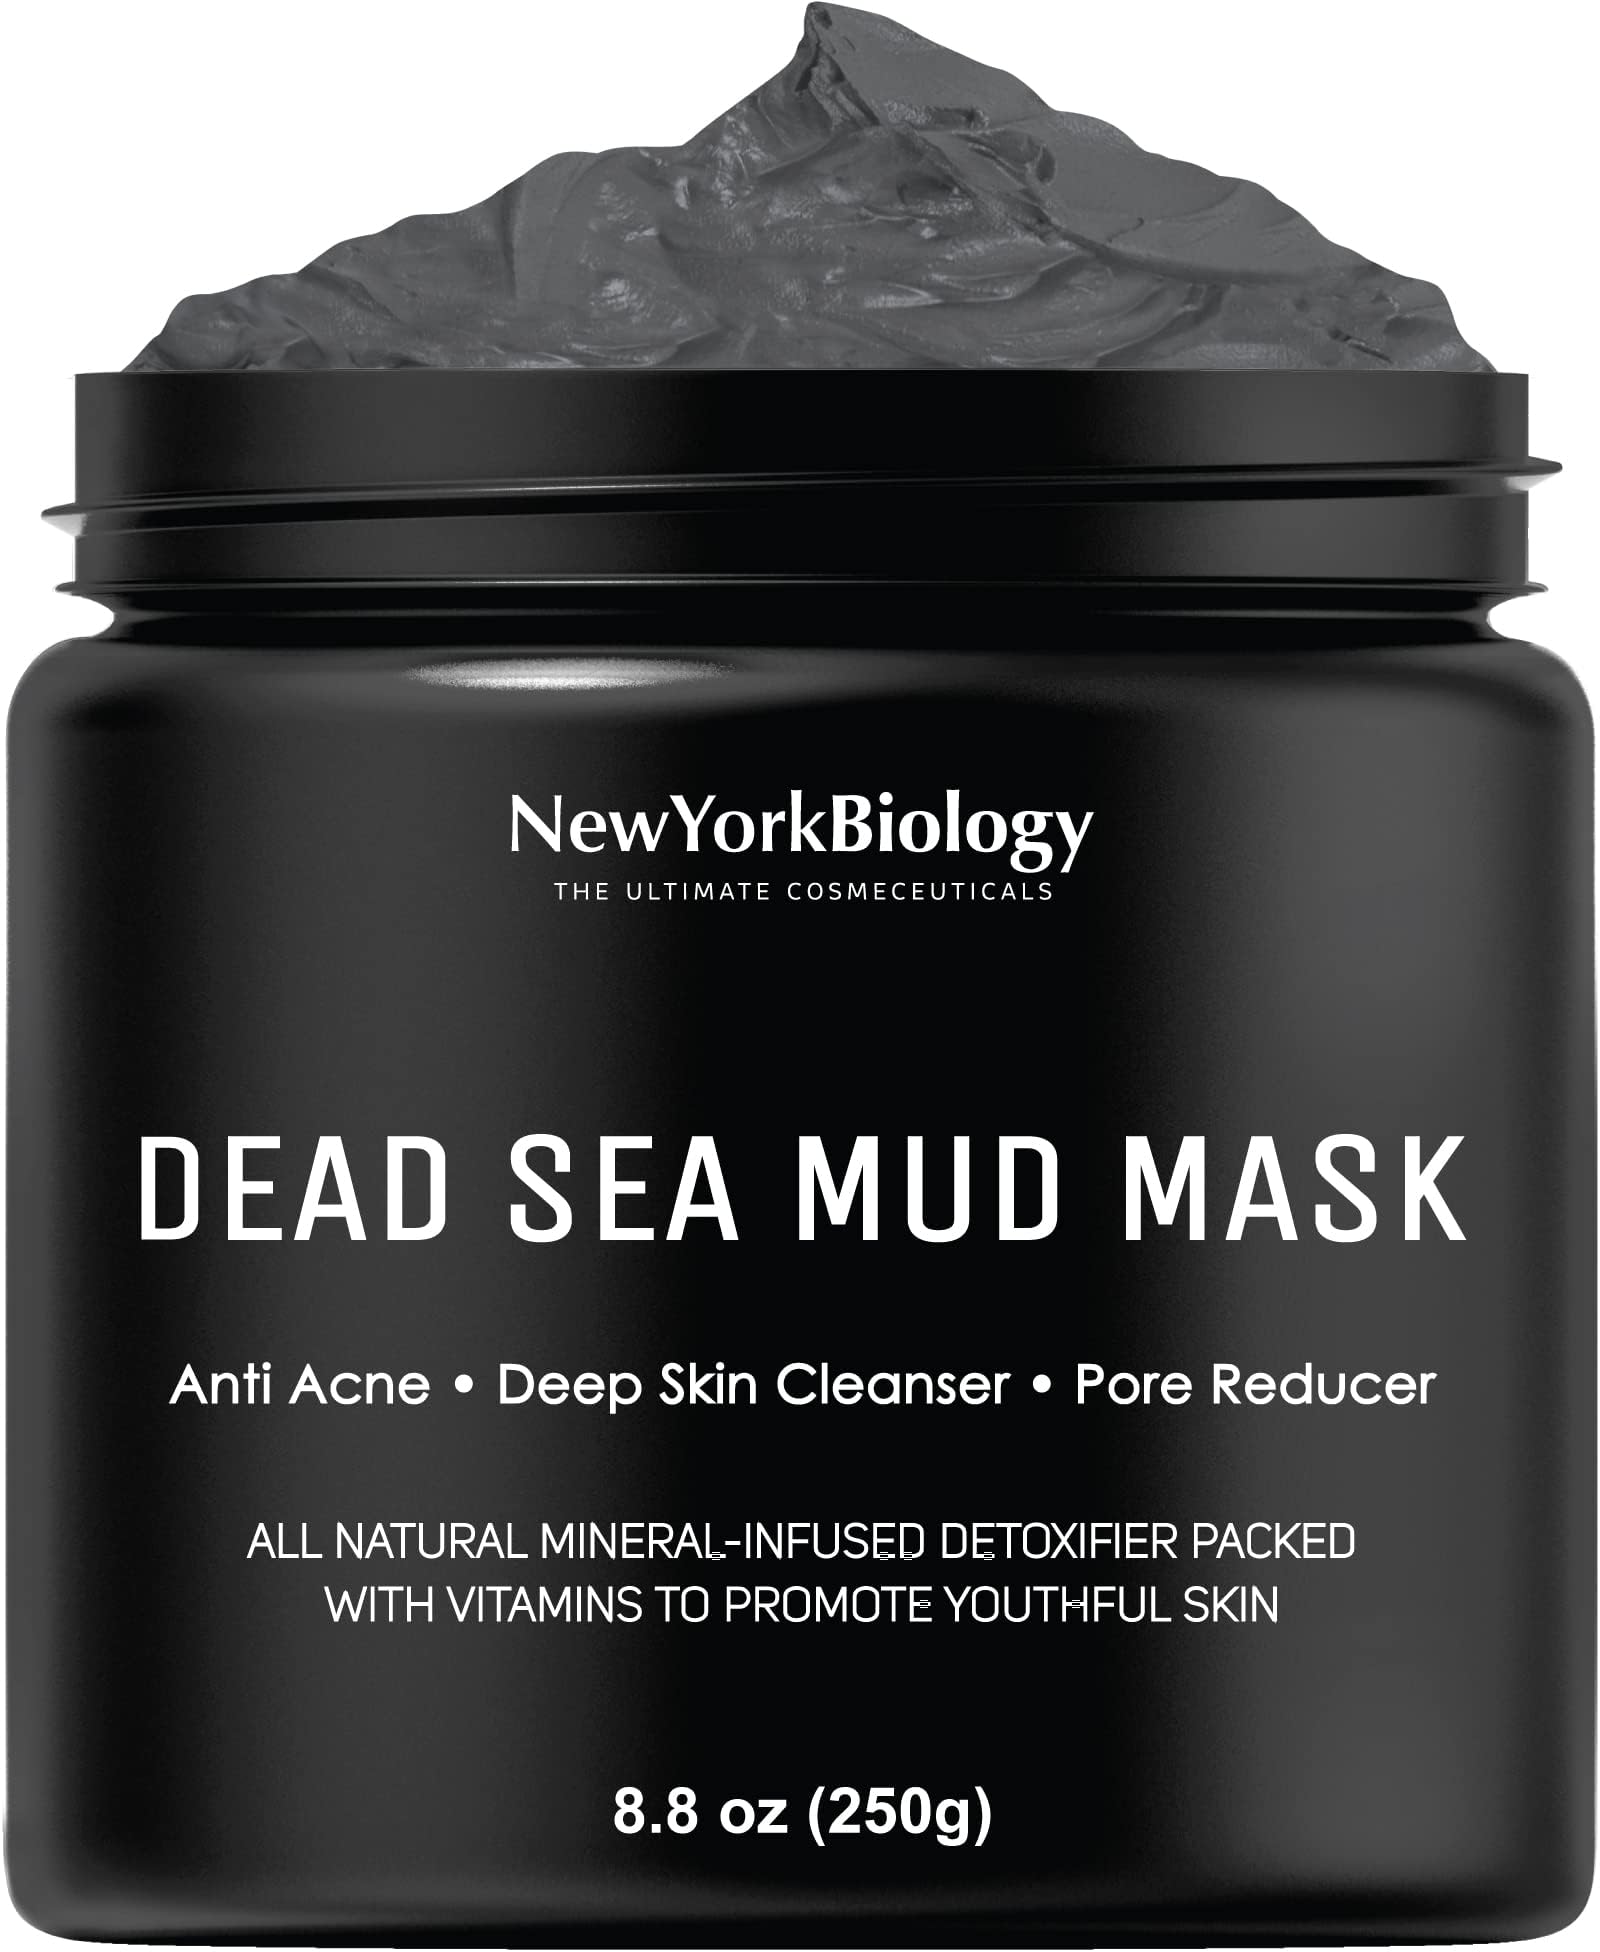 New York Biology Dead Sea Mud Mask for Face and Body 8.8oz with 3 pcs Face Mask Brush Applicators - Spa Quality Pore Reducer for Acne, Blackheads and Oily Skin - Silicone Face Brushes for Mud Masks